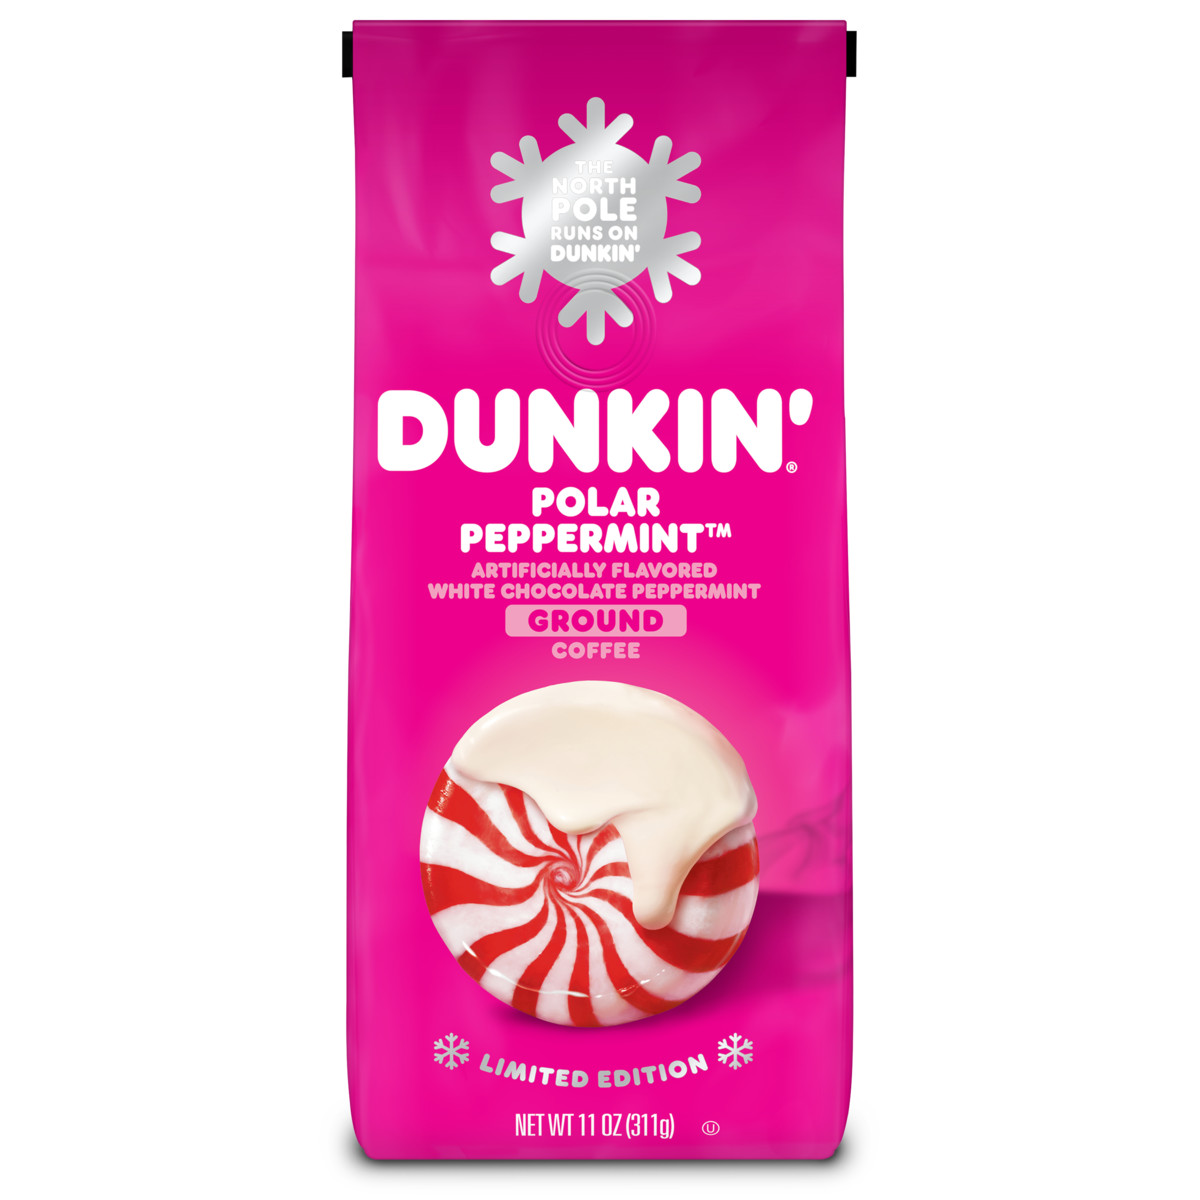 Dunkin' Limited Edition Polar Peppermint White Chocolate and Peppermint Ground Coffee in a pink bag with an image of a peppermint candy with white chocolate and a silver snowflake on it